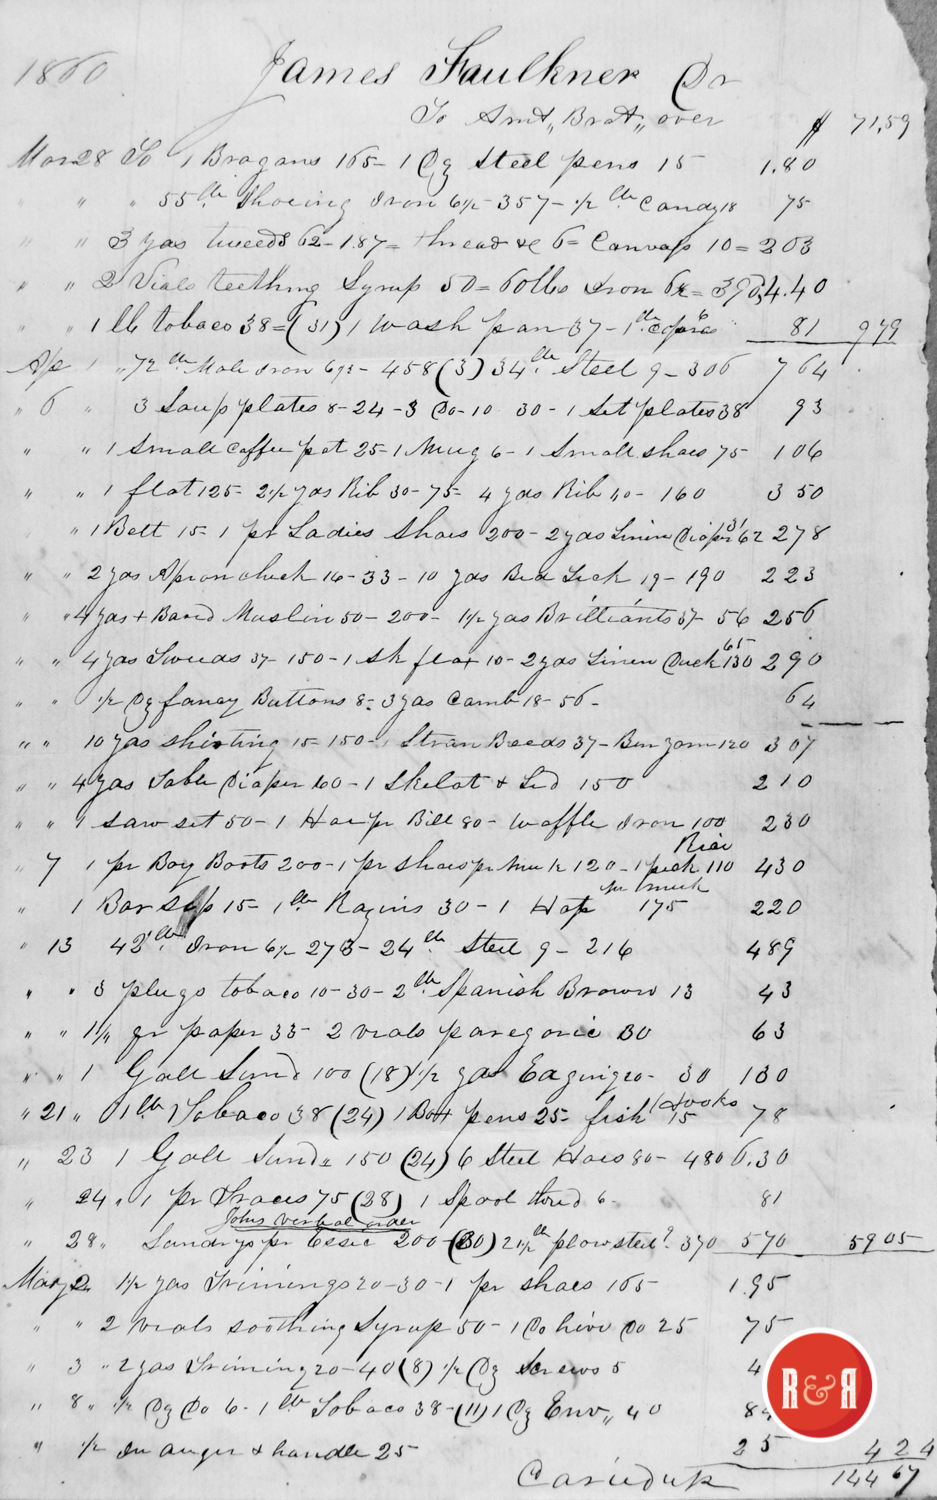 LEDGER FROM CRAIG AND TAYLOR - 1860, p. 2